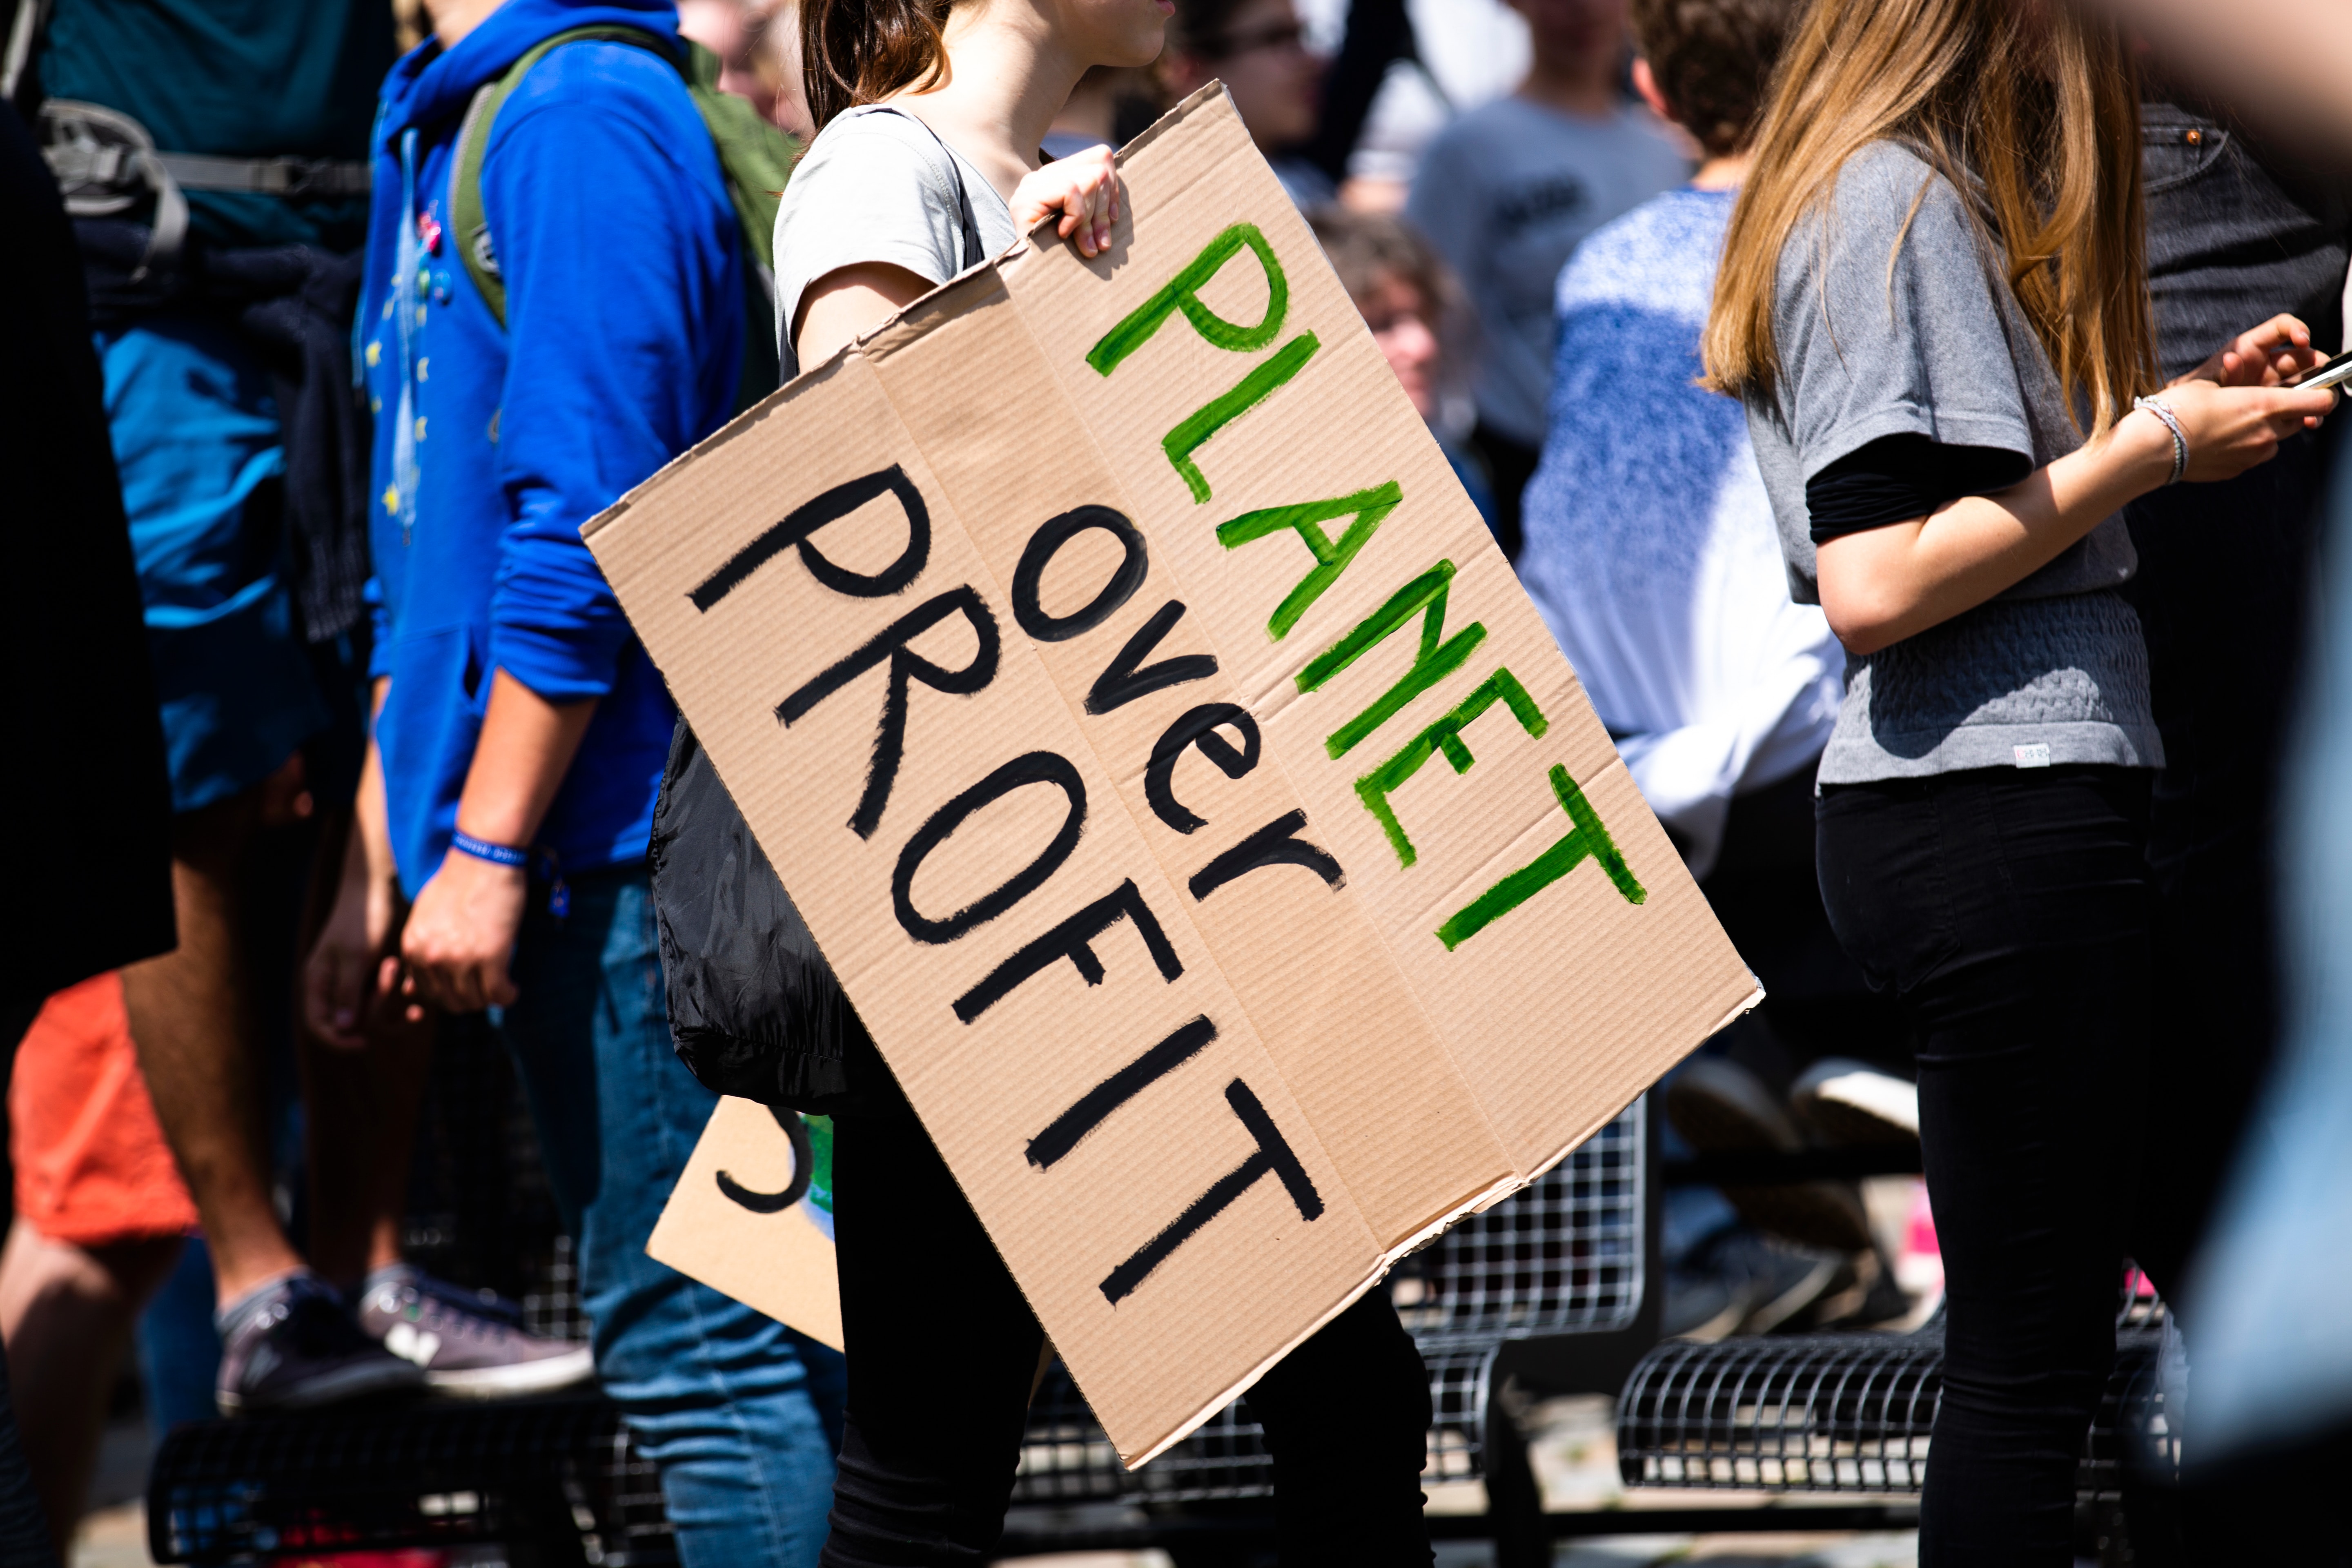 Lady holding a sign 'planet over profit'